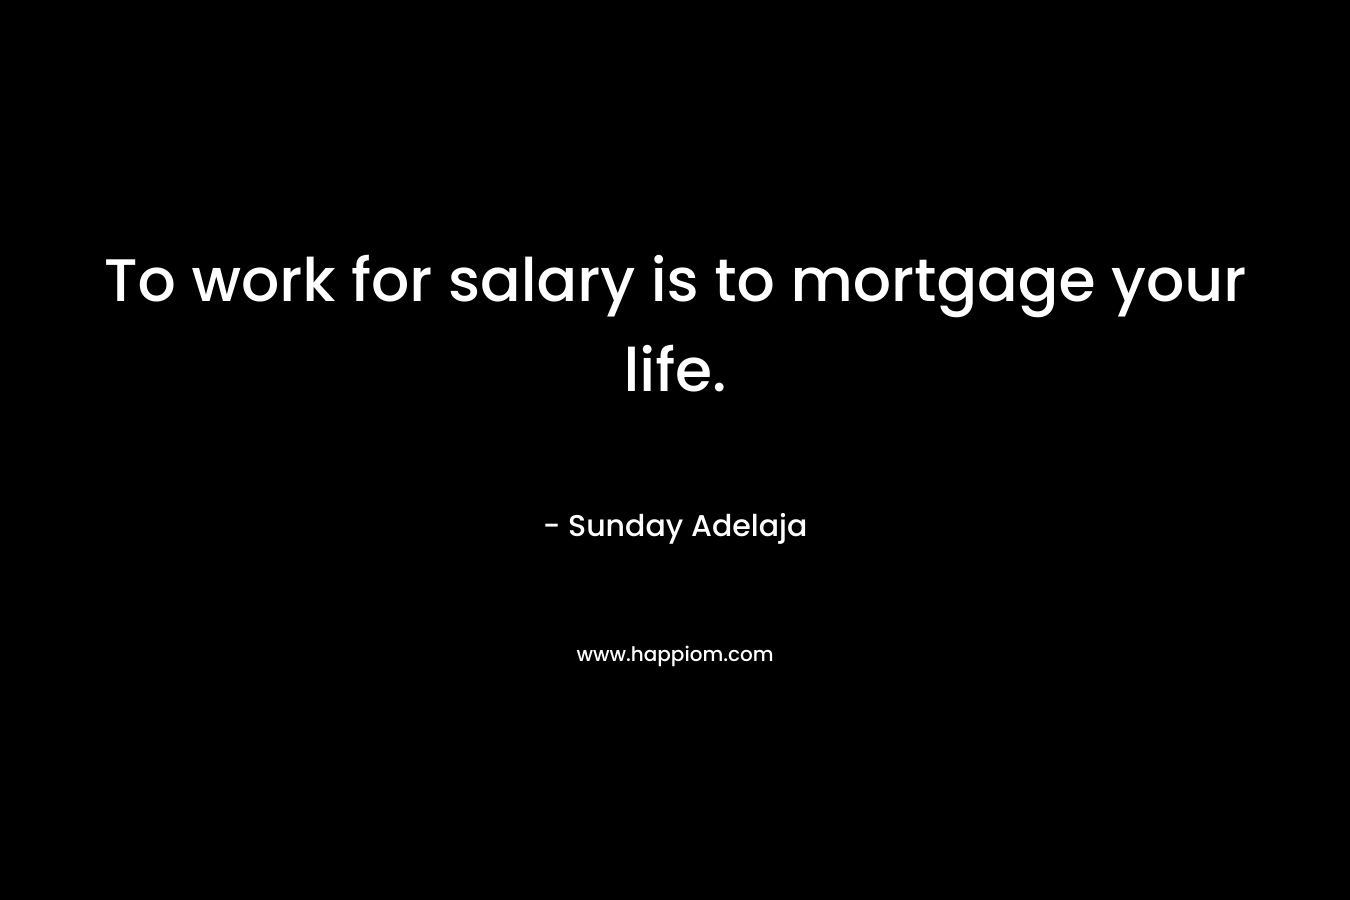 To work for salary is to mortgage your life.